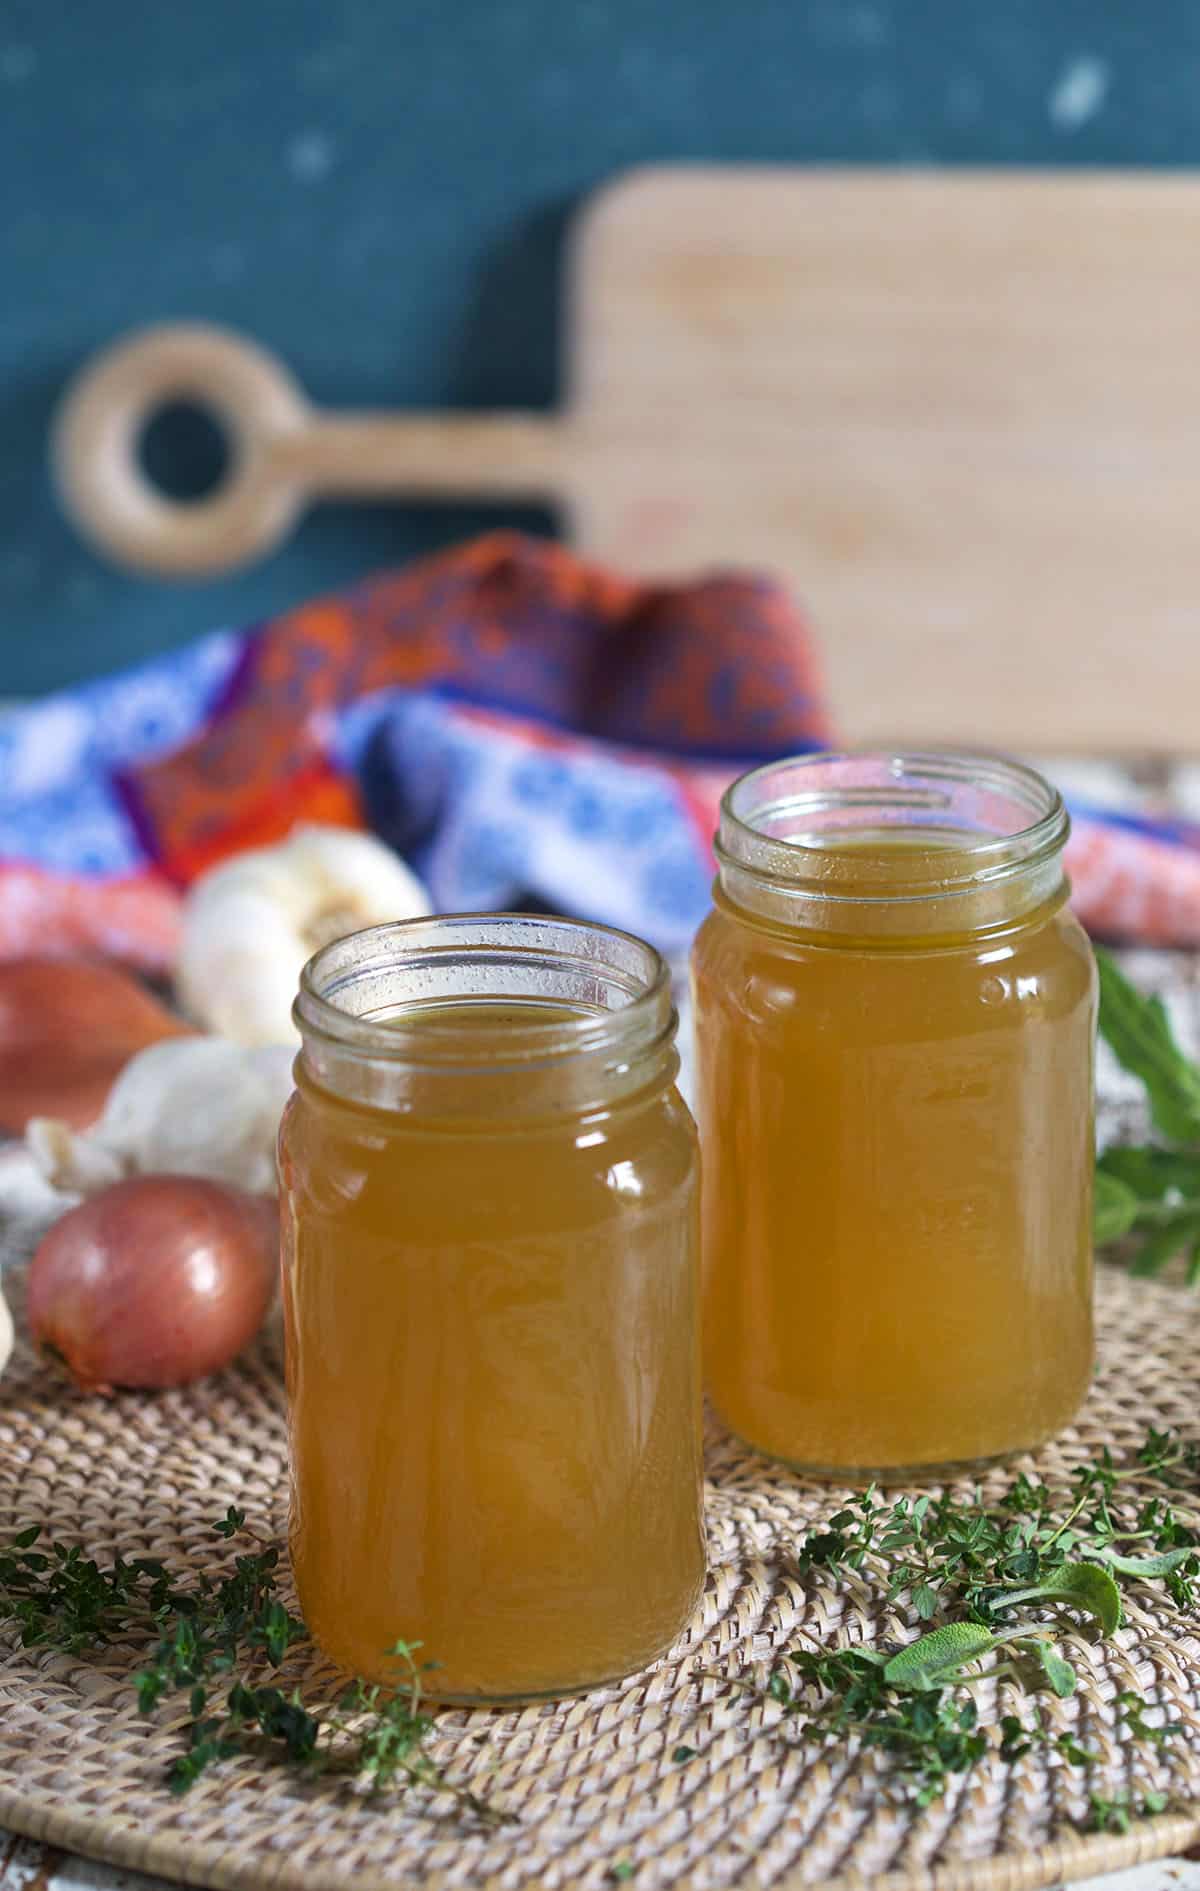 Two full jars of broth are presented on a white surface with a cutting board in the background.